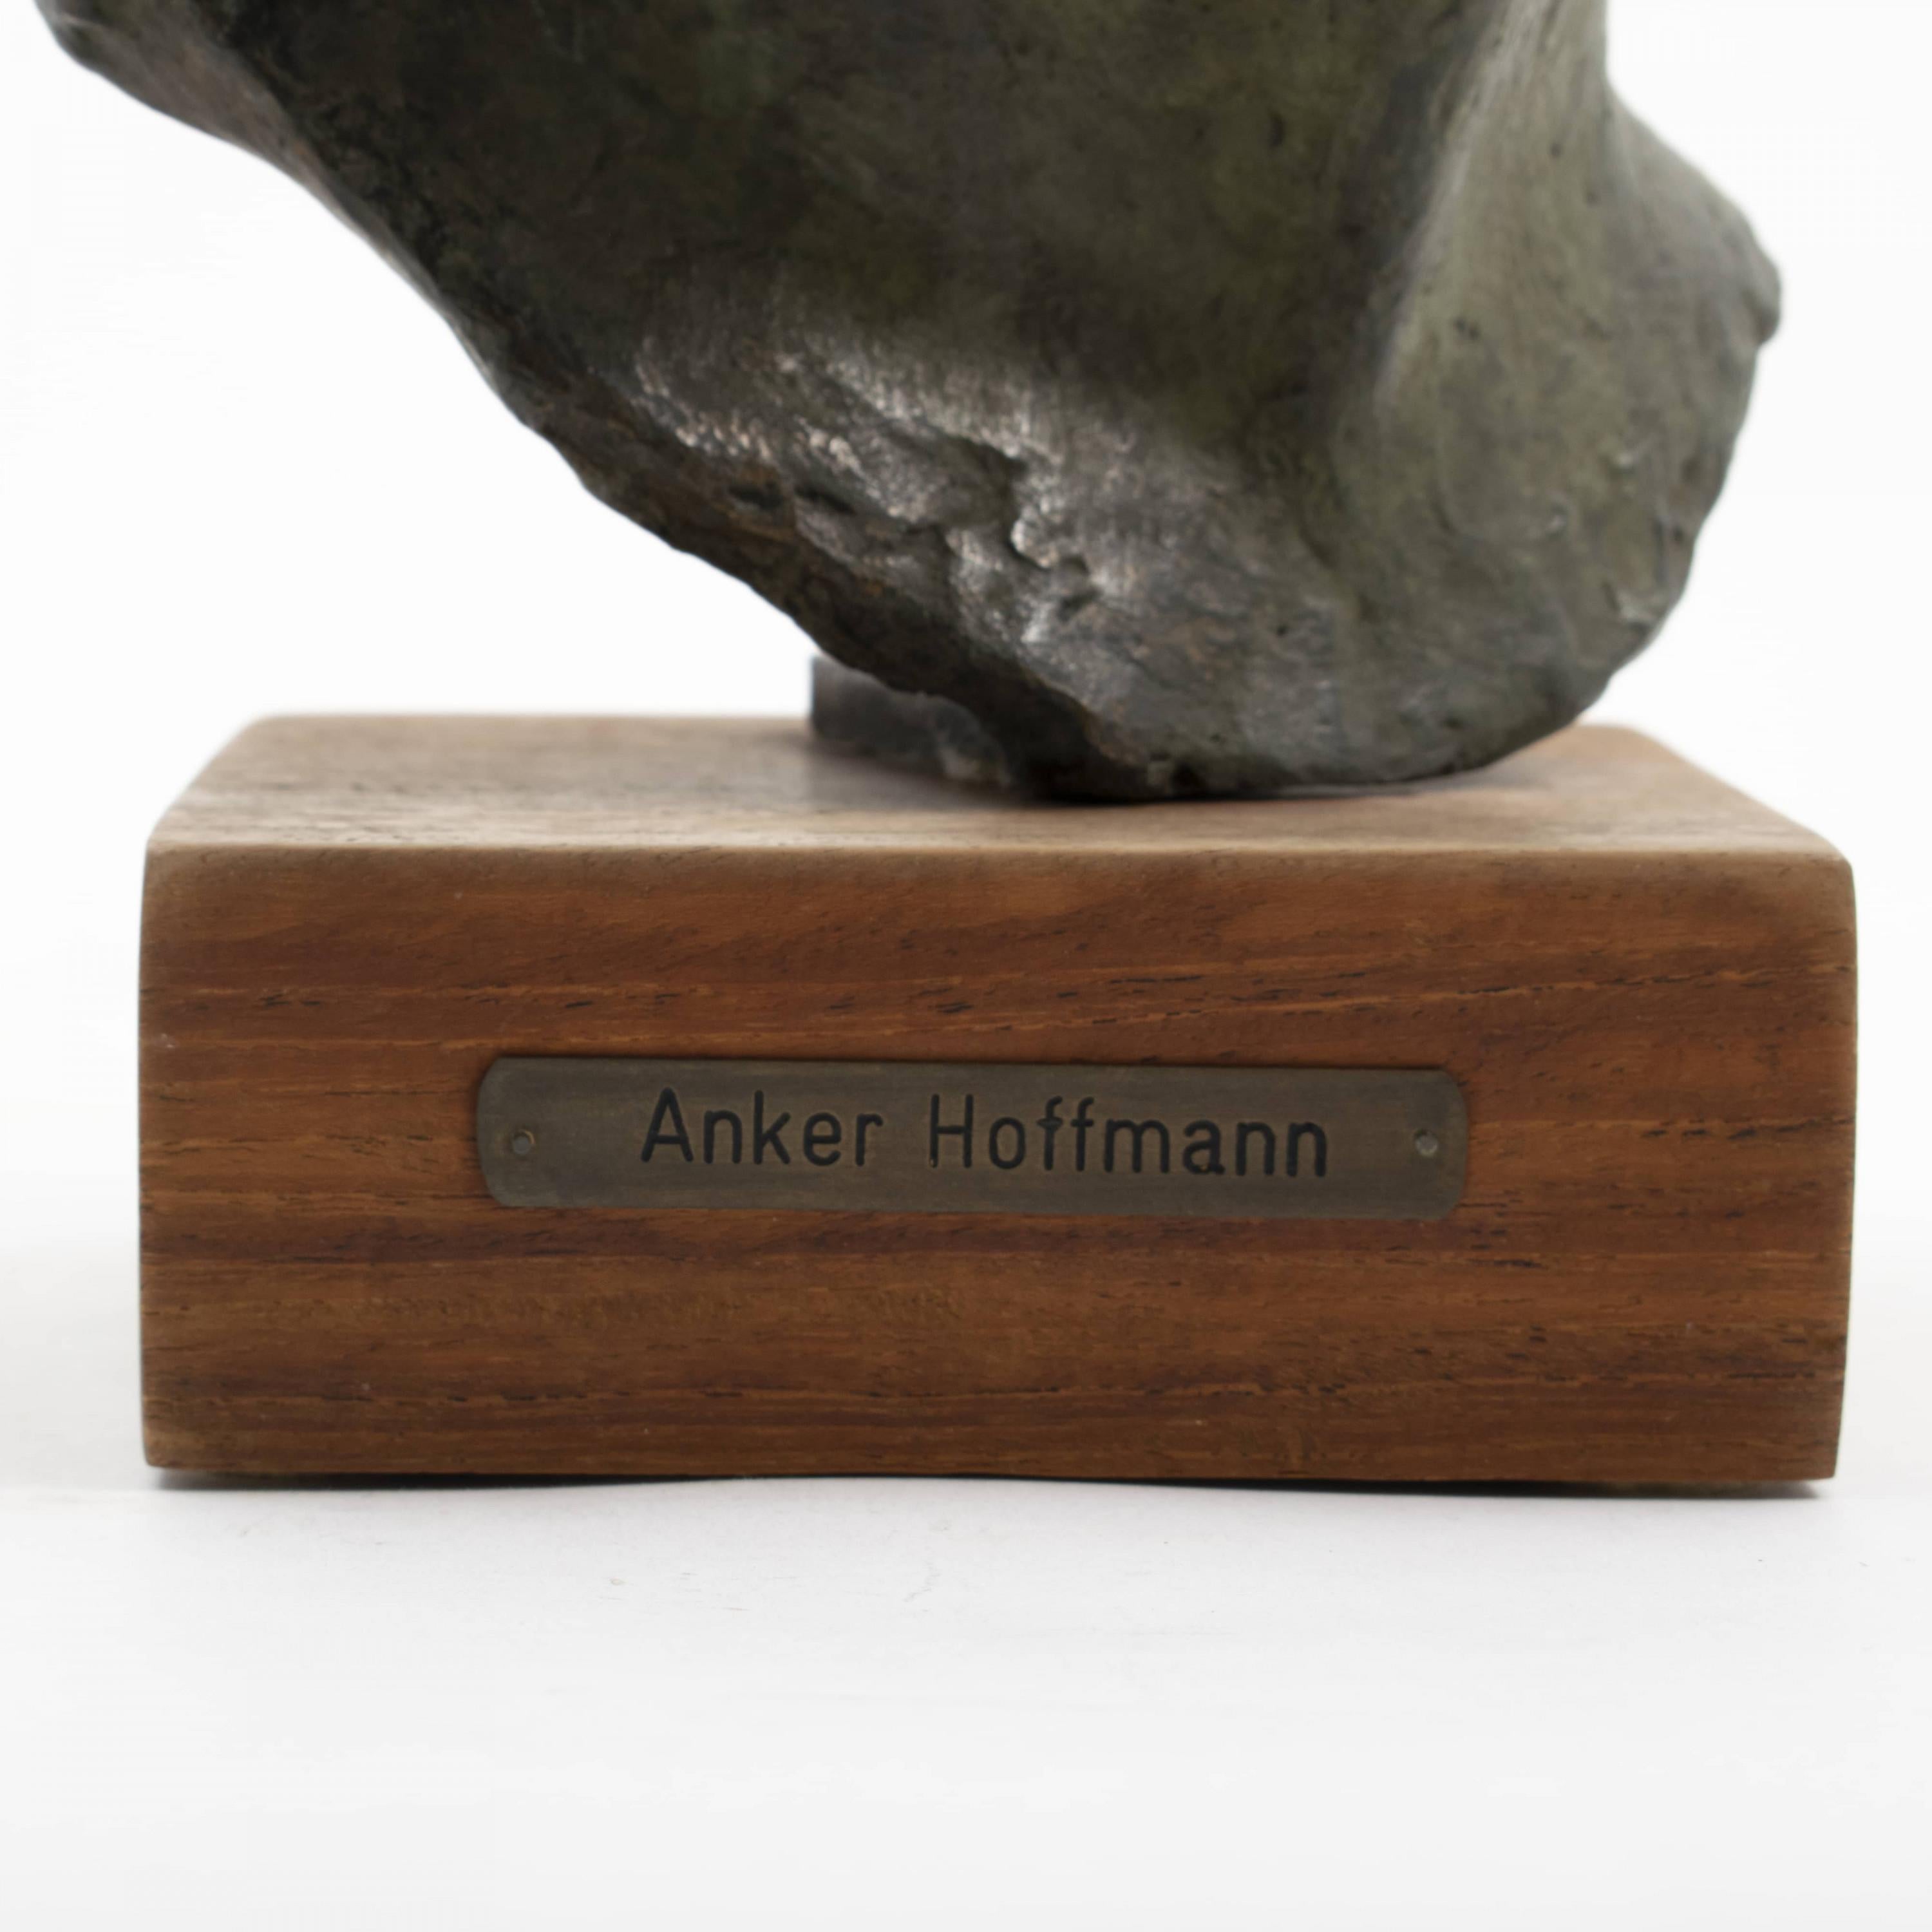 Anker Hoffmann, Green Patinated Bronze Sculpture of a Young For Sale 3